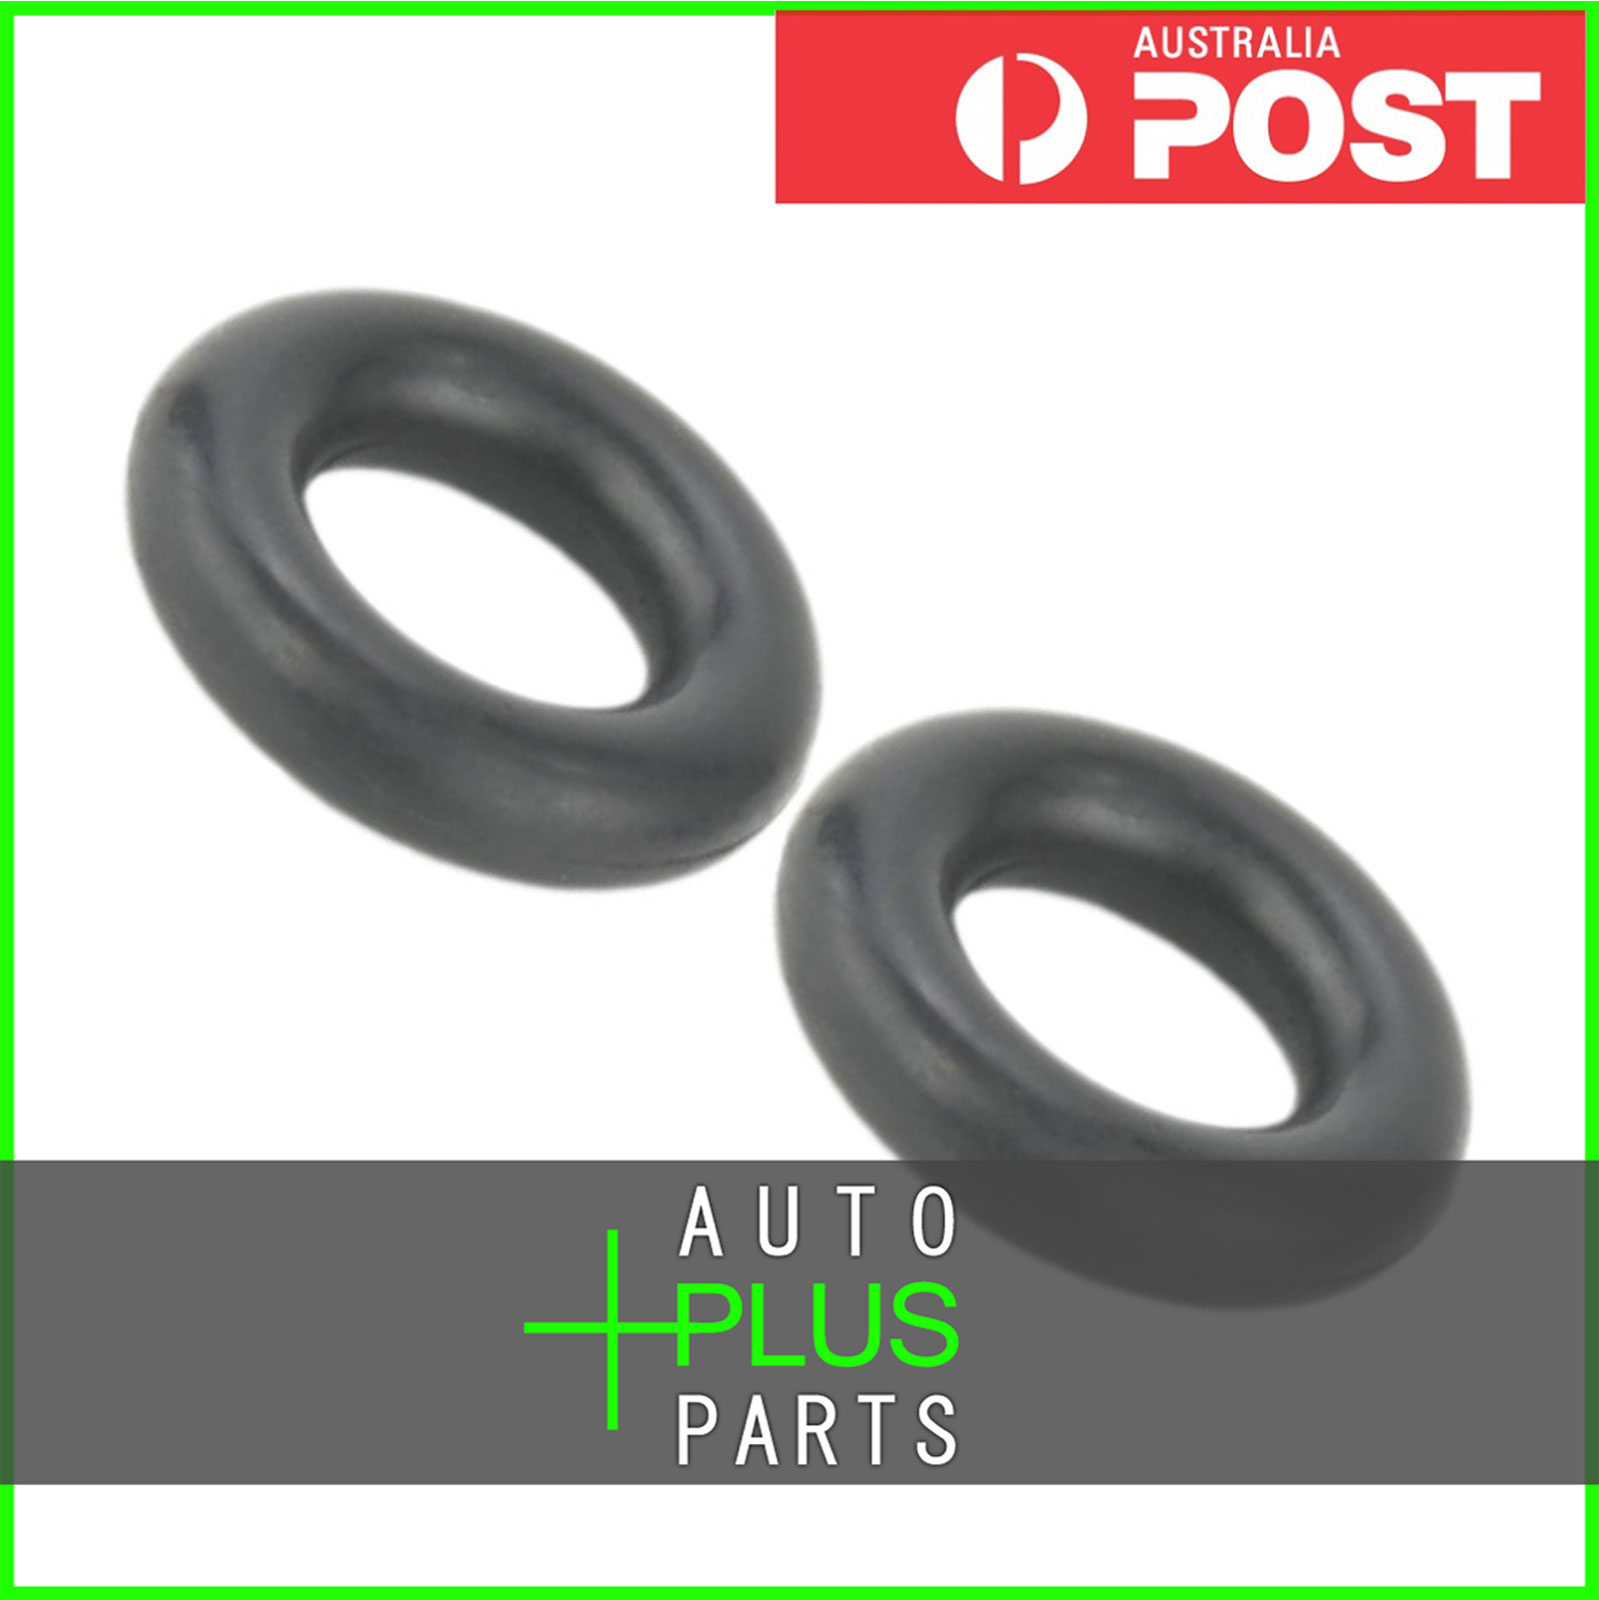 Fits MERCEDES BENZ 600 SEL V12 USA; S 600 O-RING FUEL INJECTOR PCS 2 - USA Product Photo